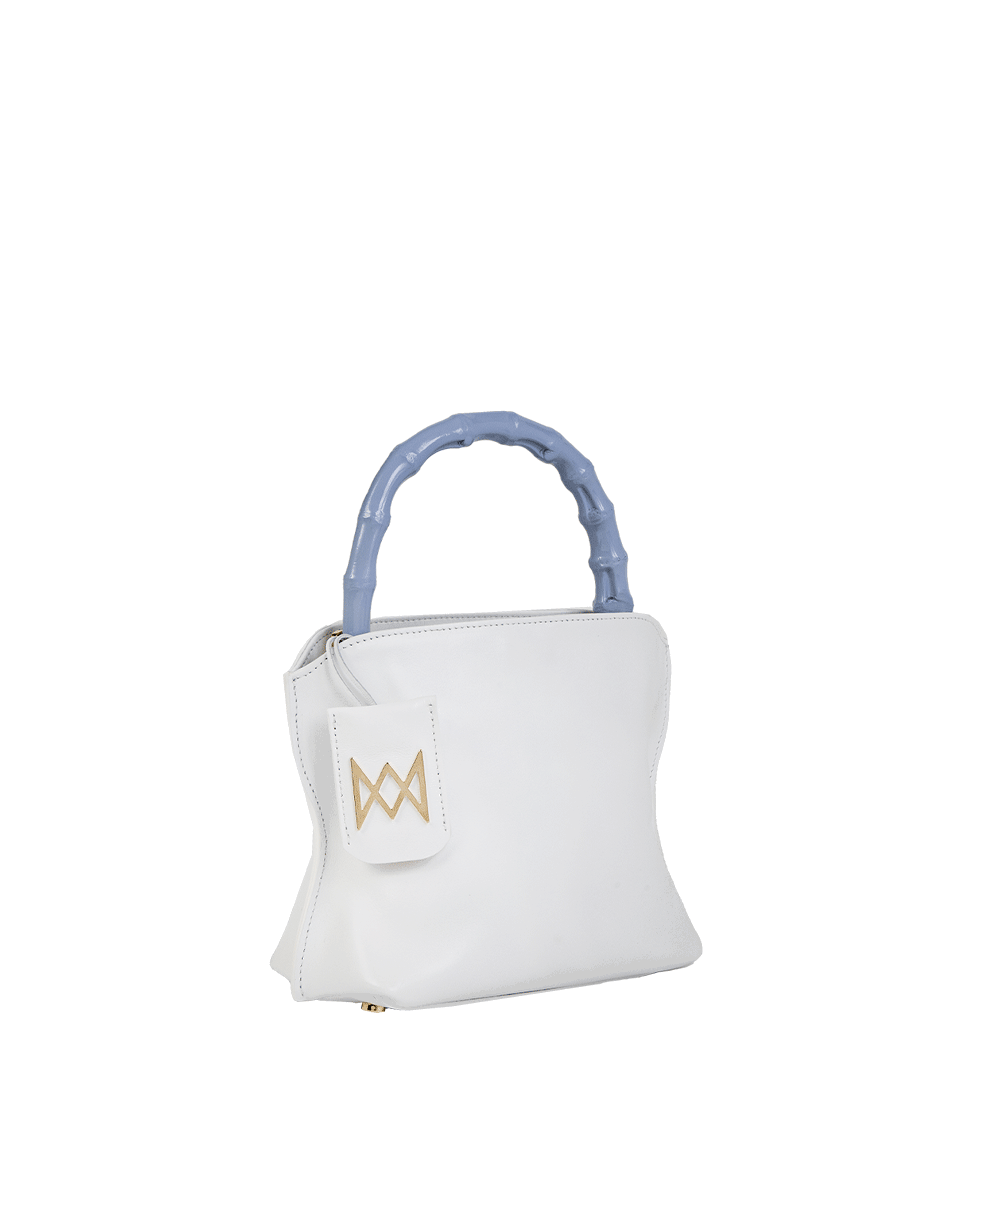 Cross-body bag in calf leather with detachable shoulder strap. Bamboo handles. Made In Italy. Two compartments, zip pocket in the back compartment. Magnetic flap closure with logo. Color: Ivory. Size: Medium